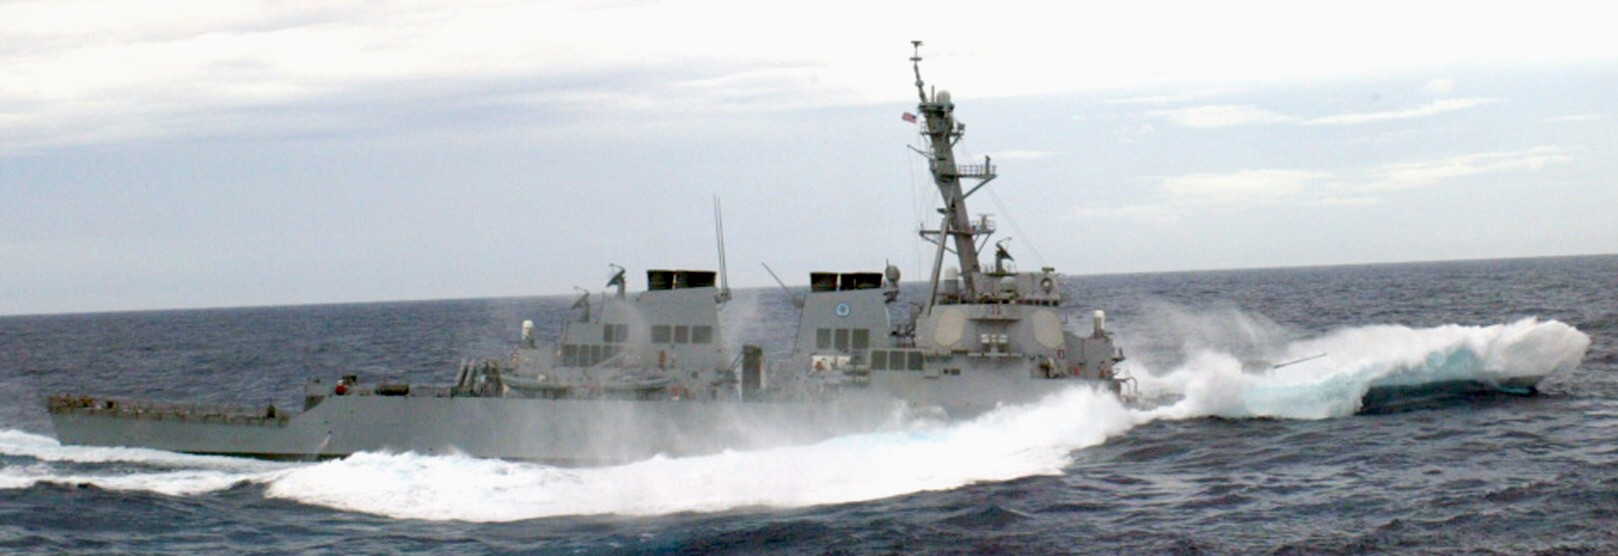 ddg-67 uss cole guided missile destroyer arleigh burke class navy aegis 41